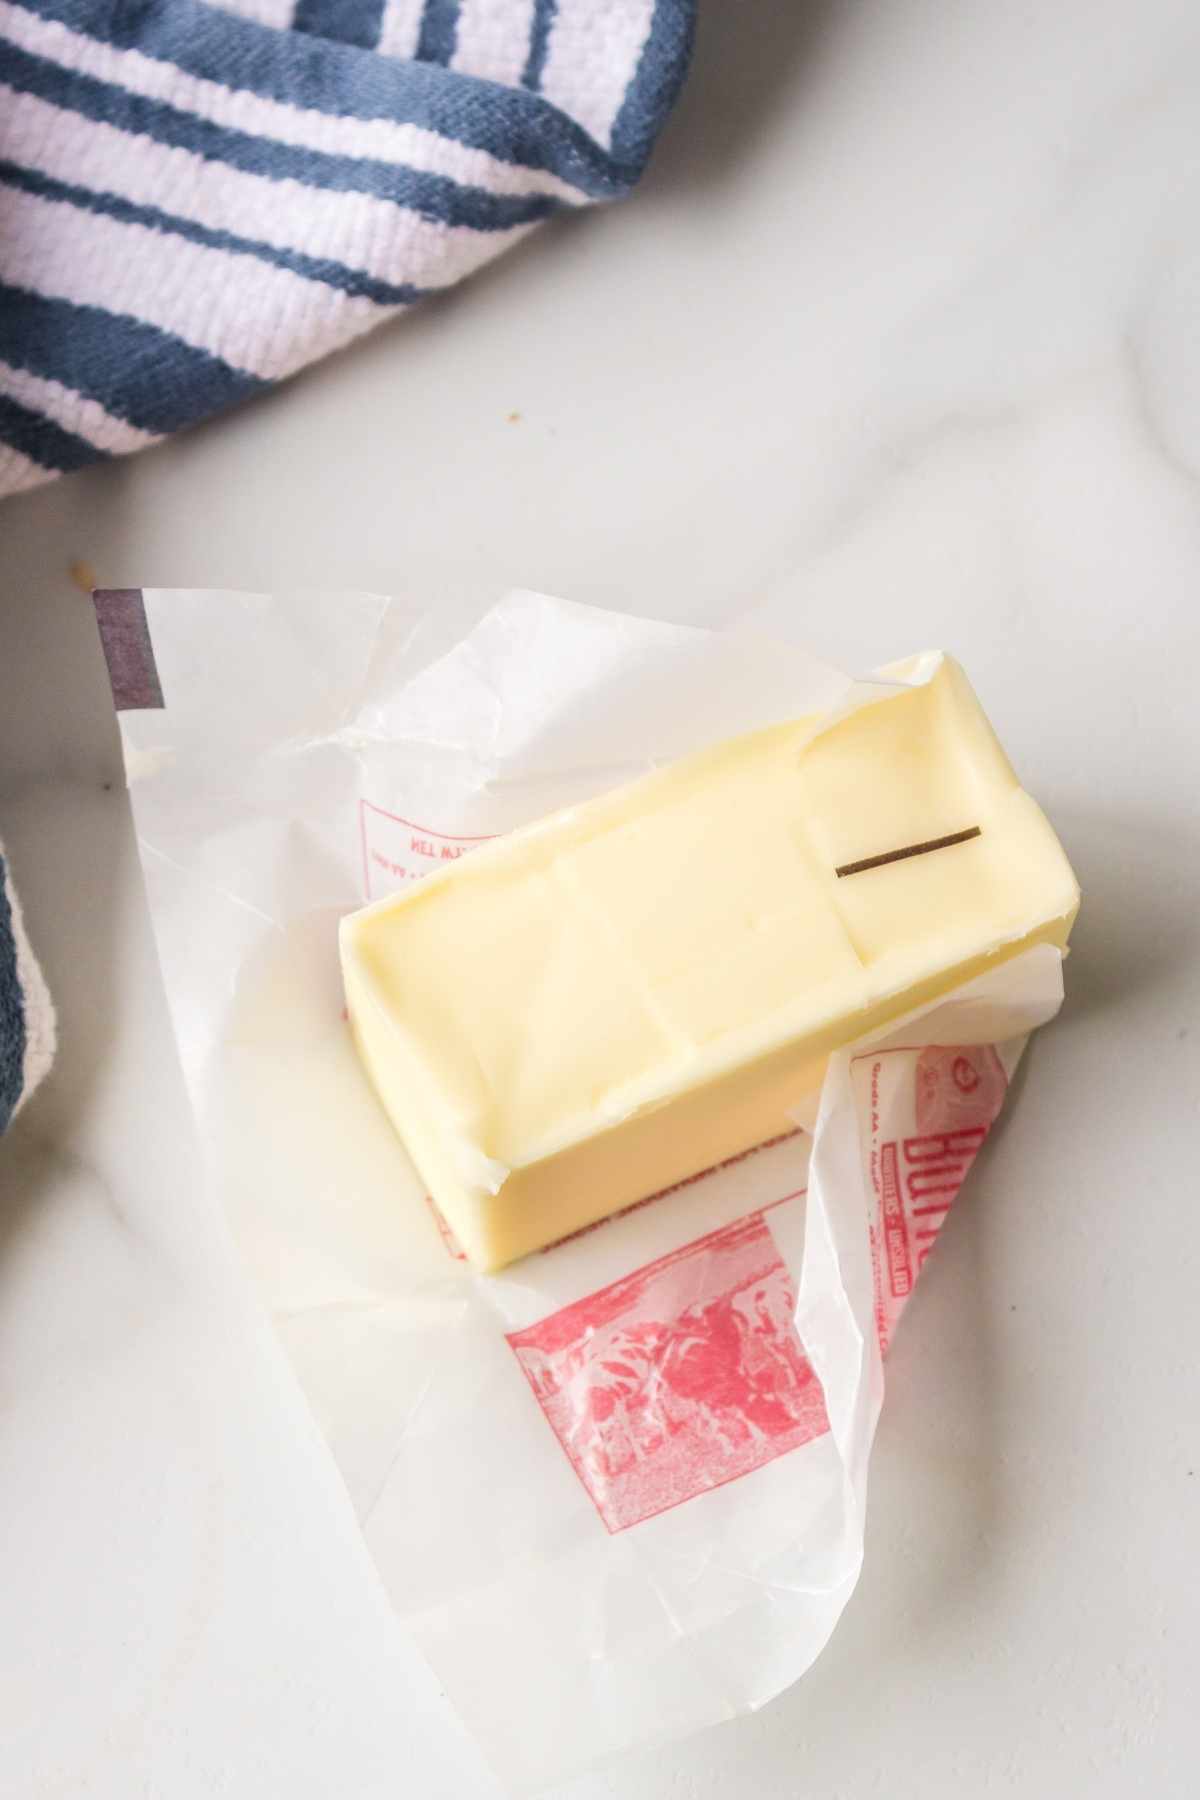 Partially unwrapped stick of butter on a counter. 